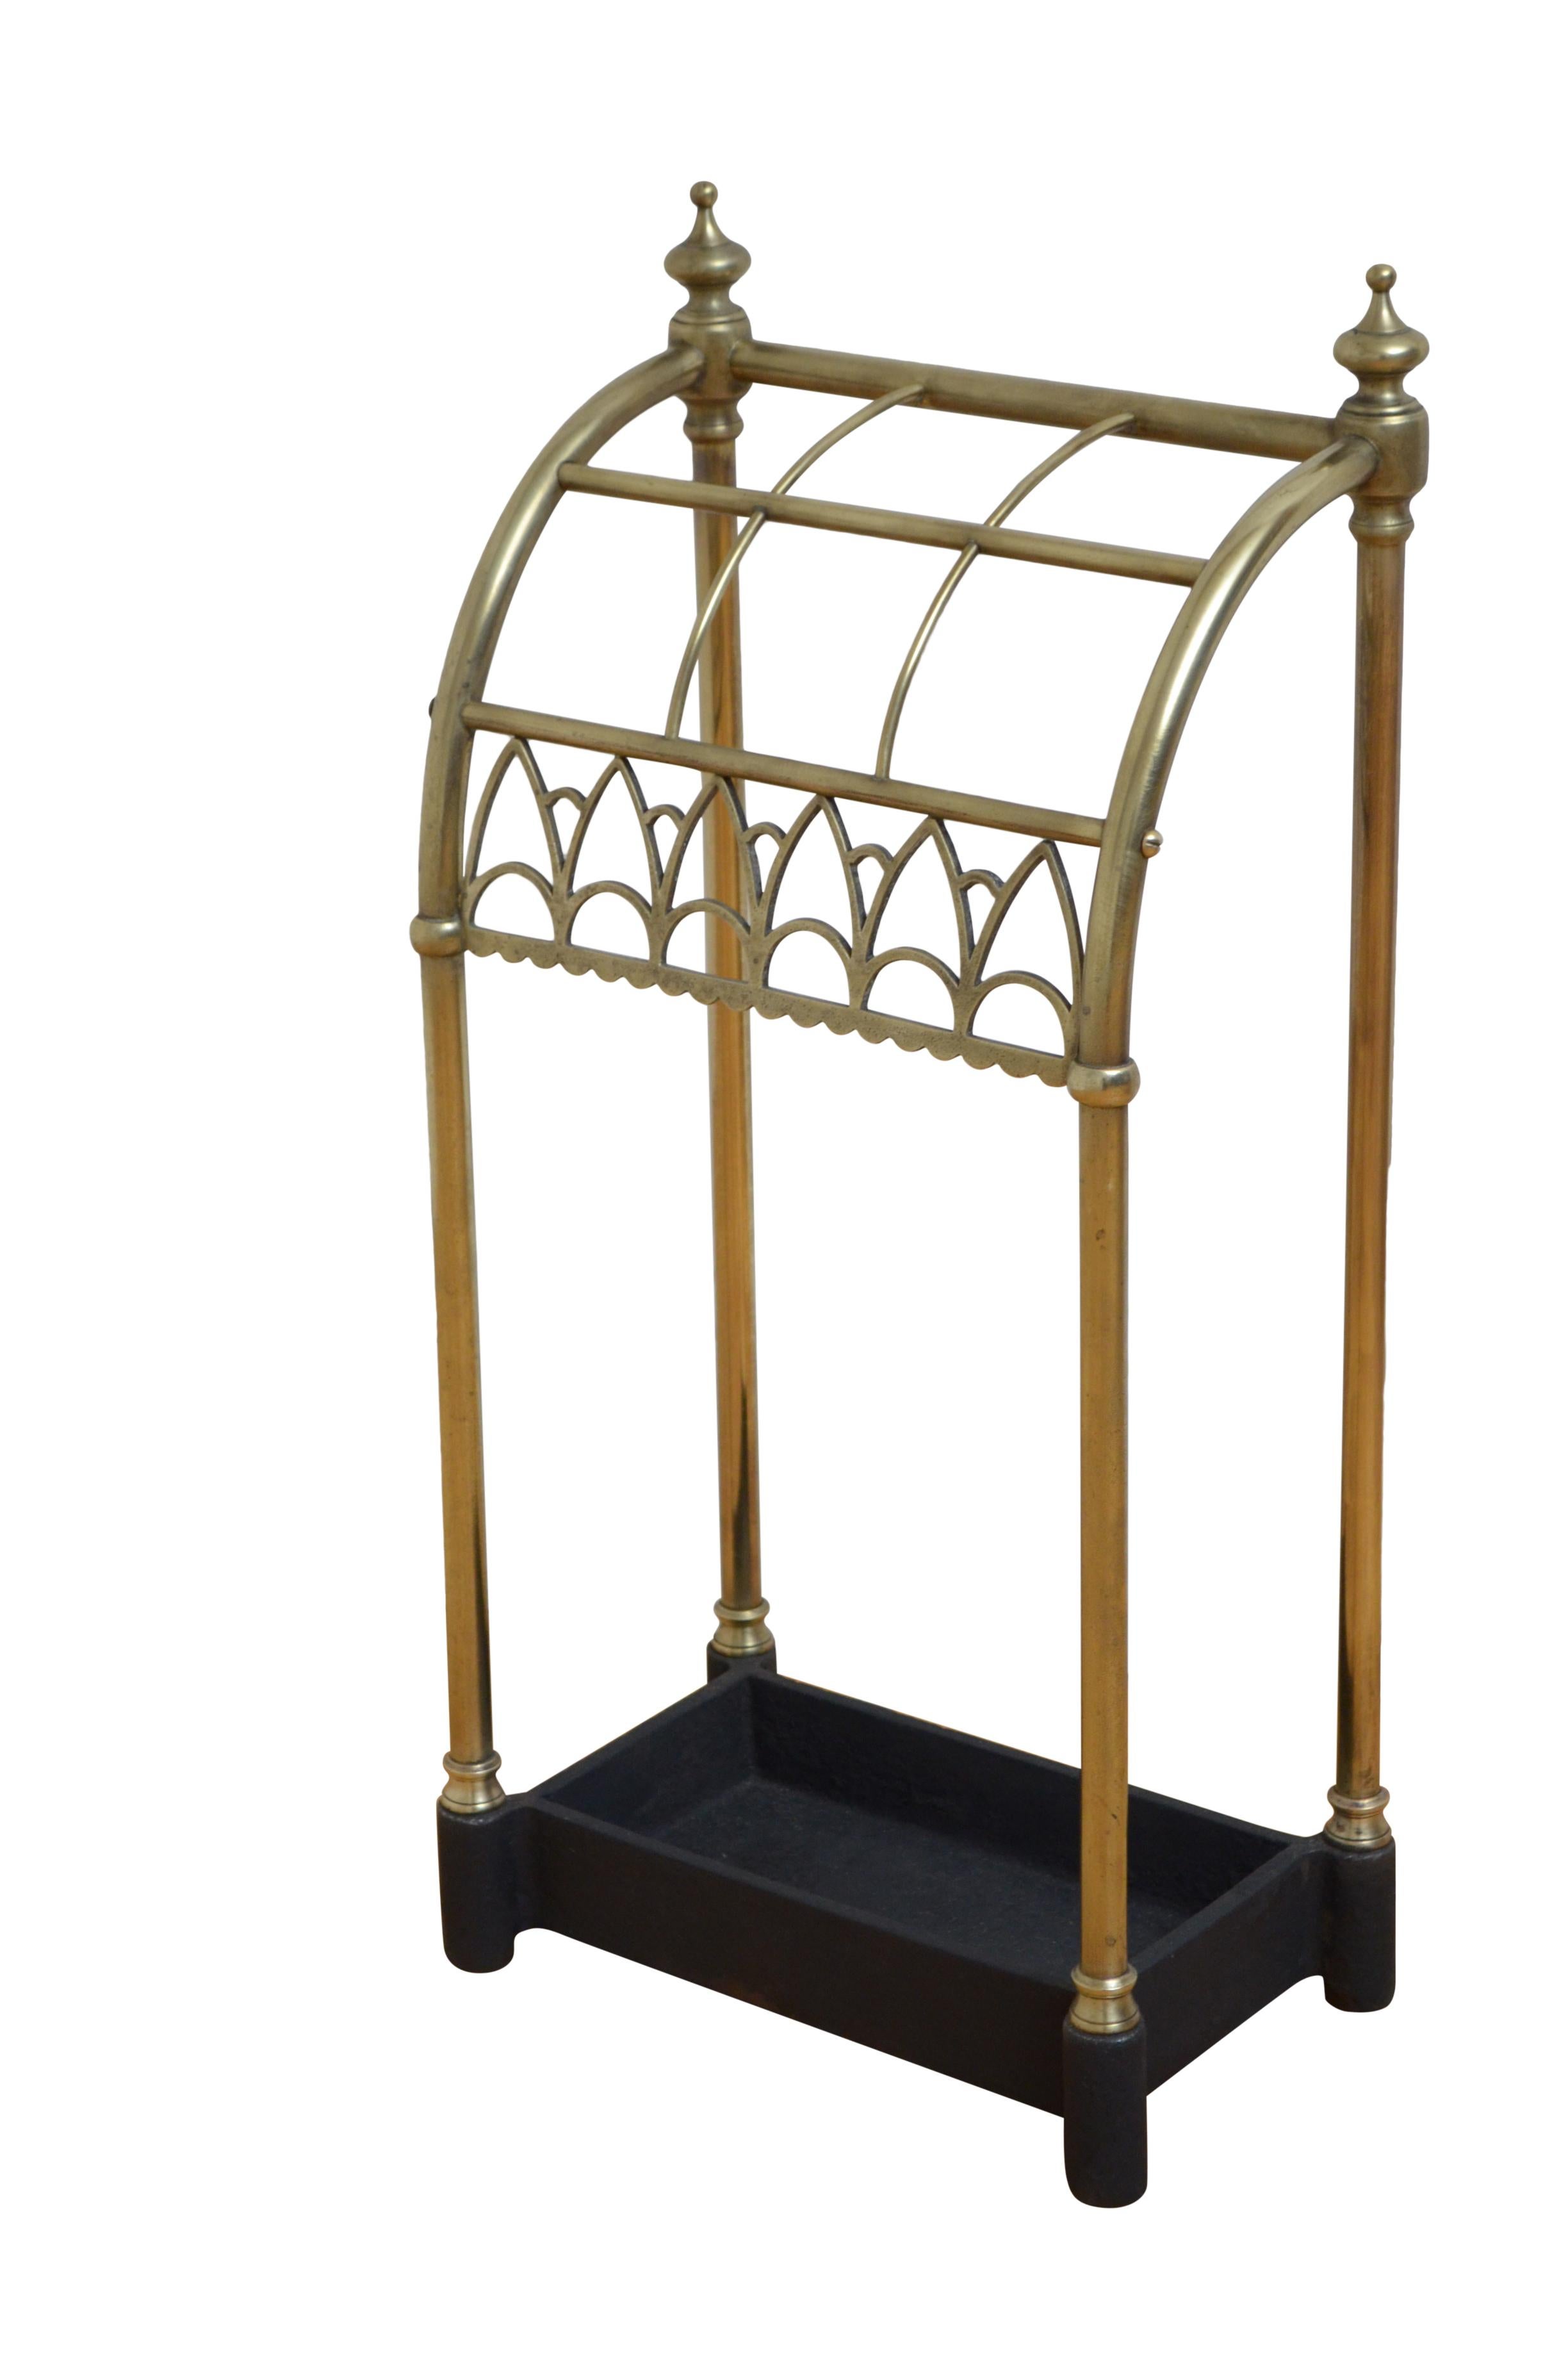 K0572 Very unusual Victorian brass umbrella stand with six divisions, finials and decorative fretwork to the front all terminating in drip tray. This antique umbrella stand has been cleaned and polished and is in home ready condition. c1870
H25